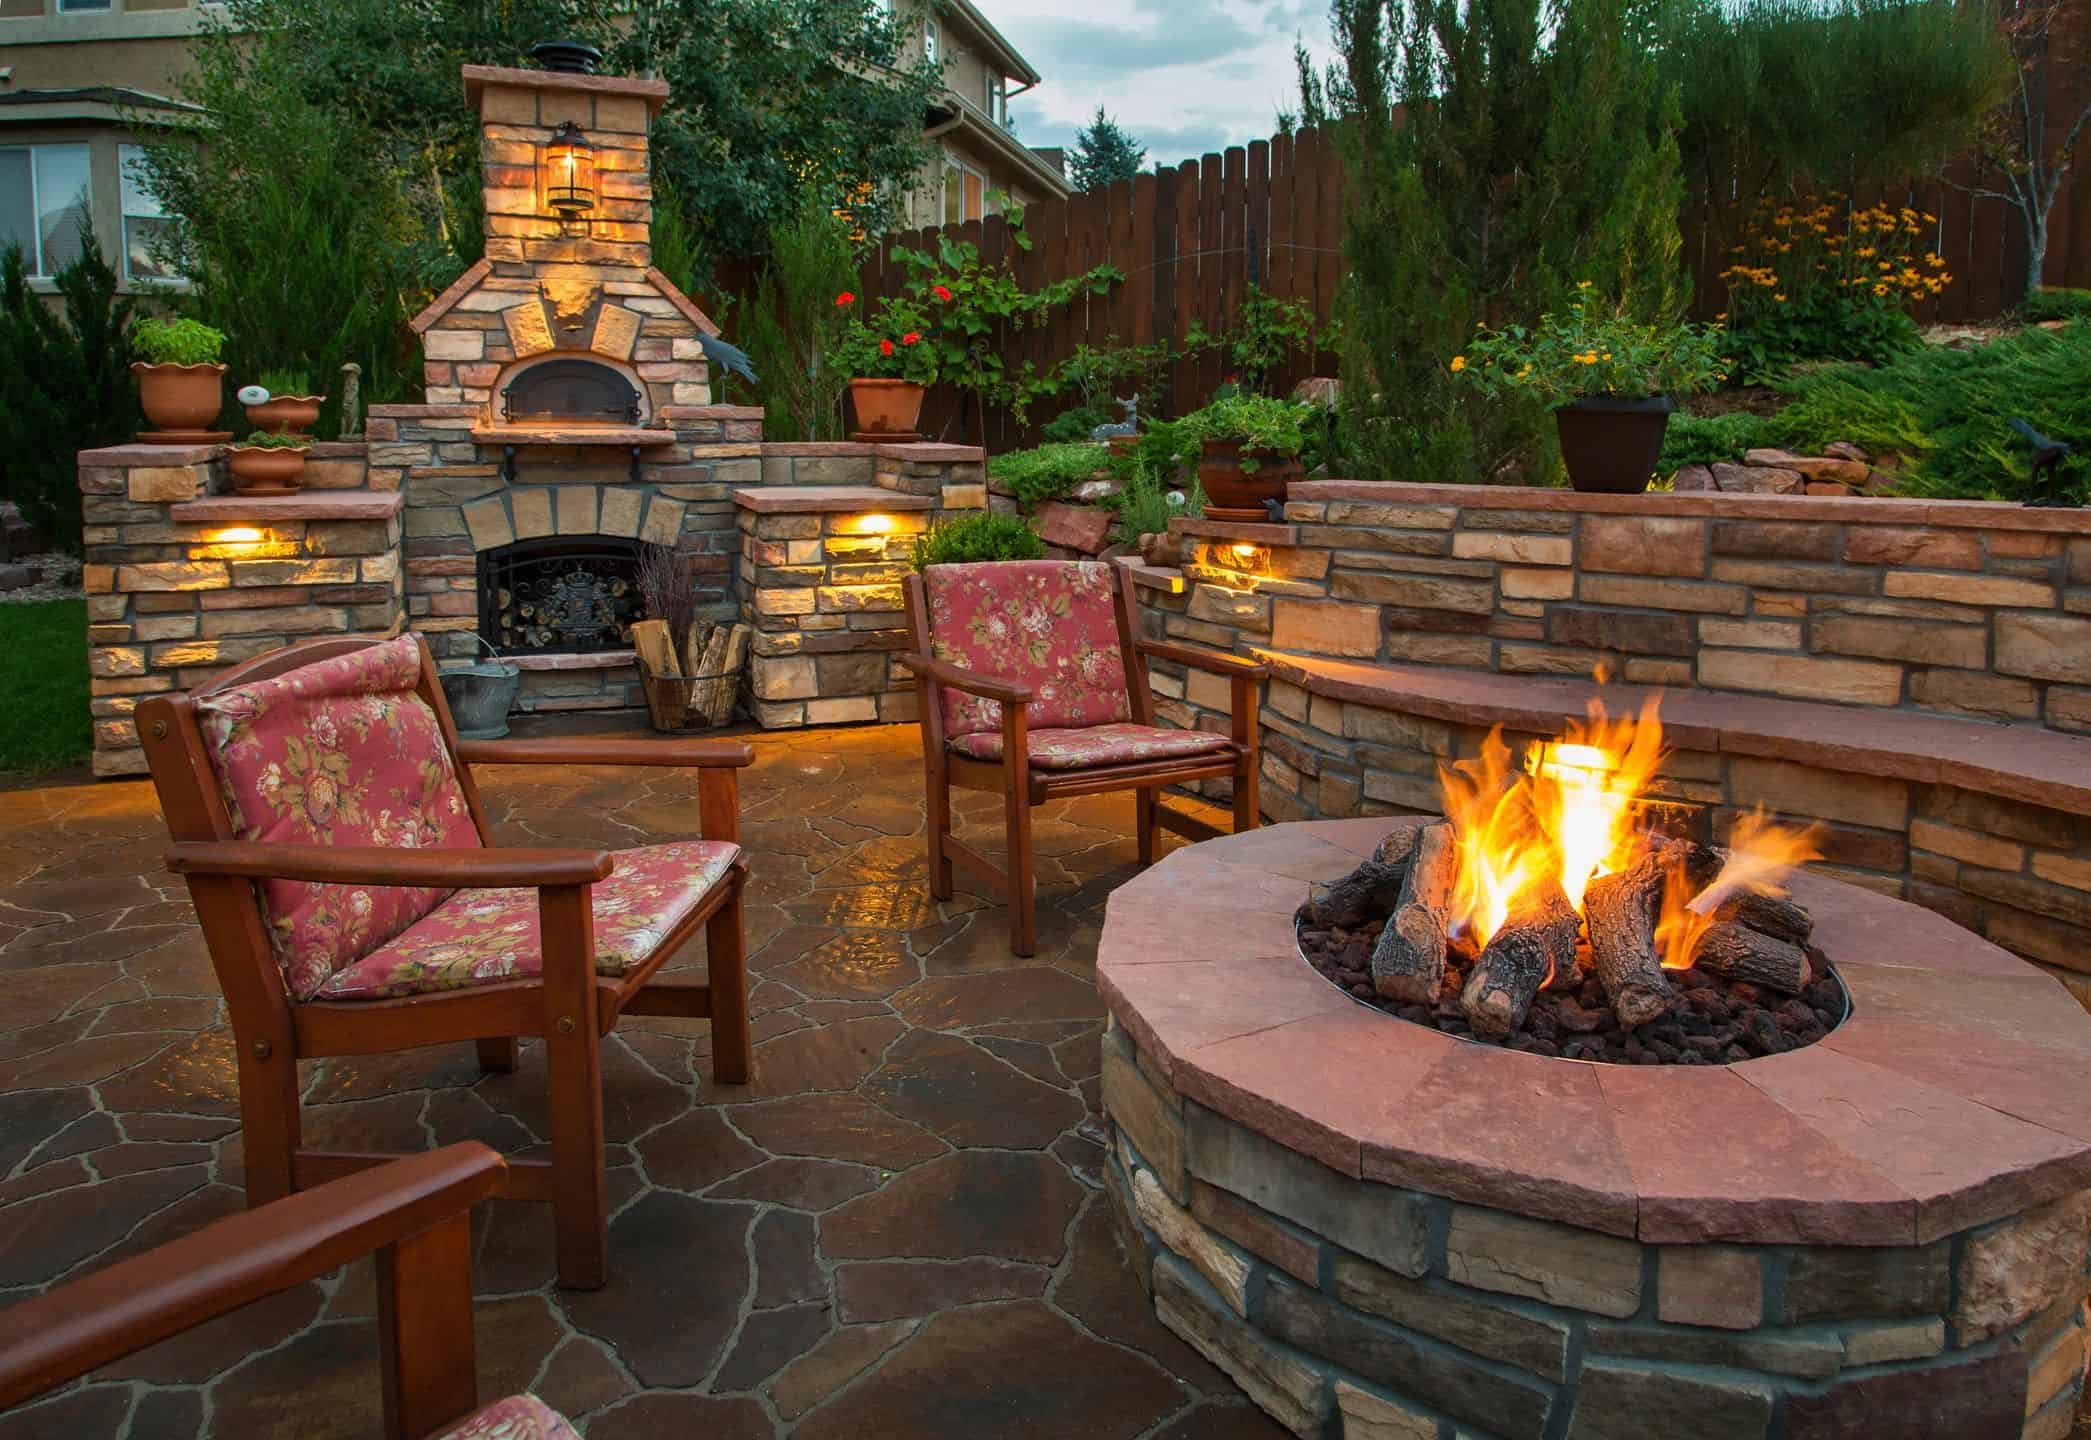 Outdoor entertaining area with fire pit and fireplace in Sandpoint Idaho